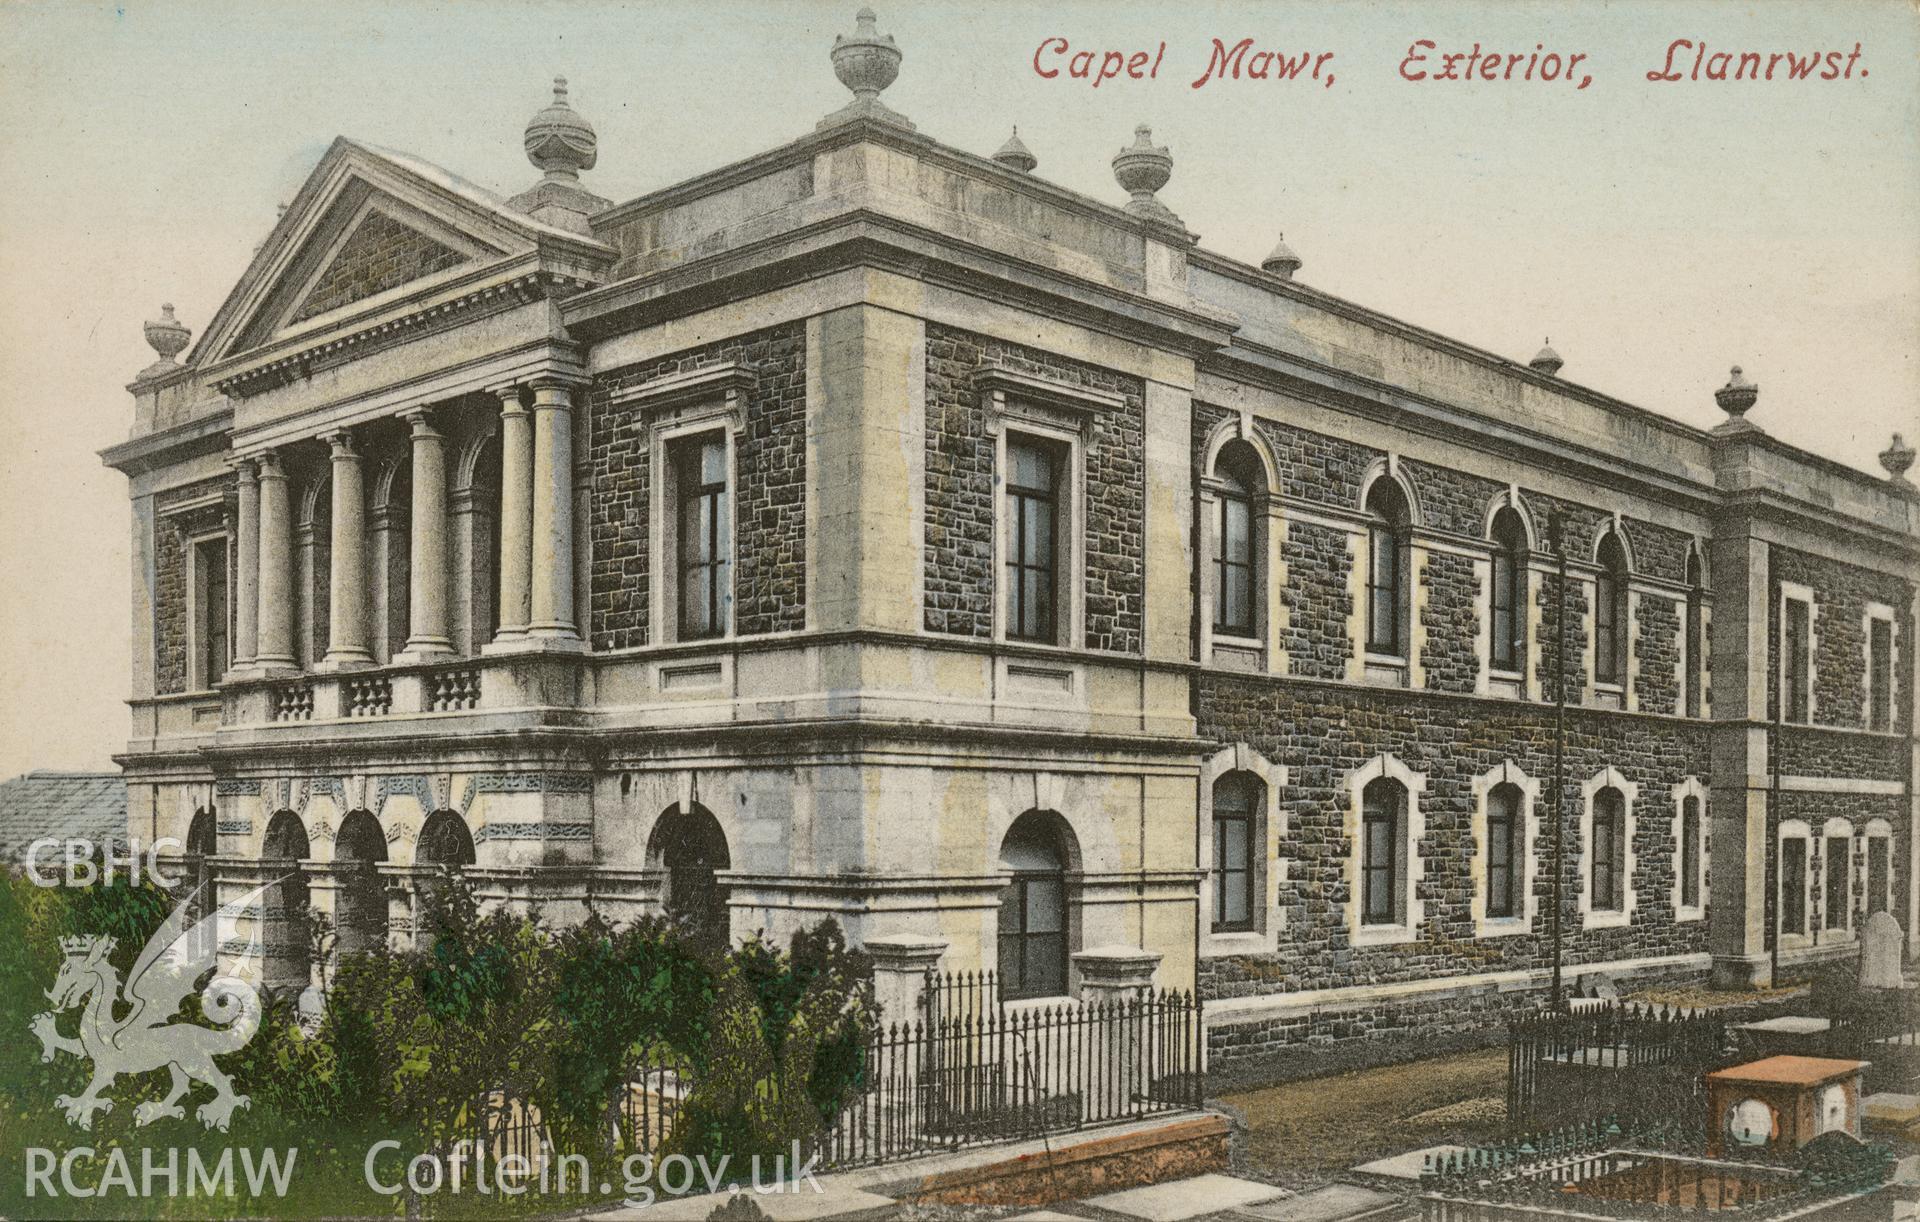 Digital copy of colour postcard showing exterior view of Seion Welsh Calvinistic Methodist chapel, Station Road, Llanrwst. Baur's series, no. 2517. Loaned for copying by Thomas Lloyd.